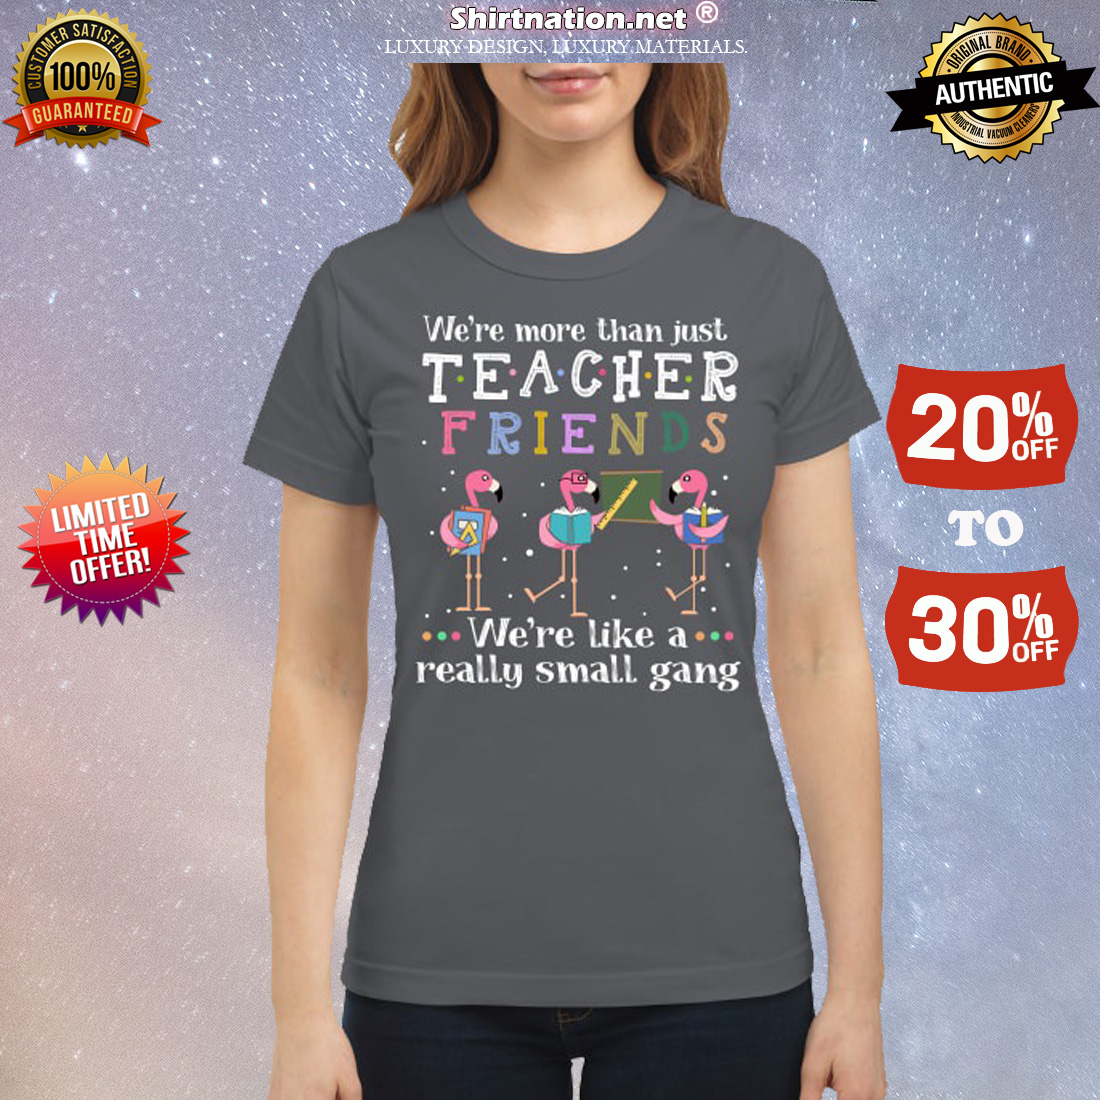 Flamingo we are more than just teacher we are like a small gang classic shirt